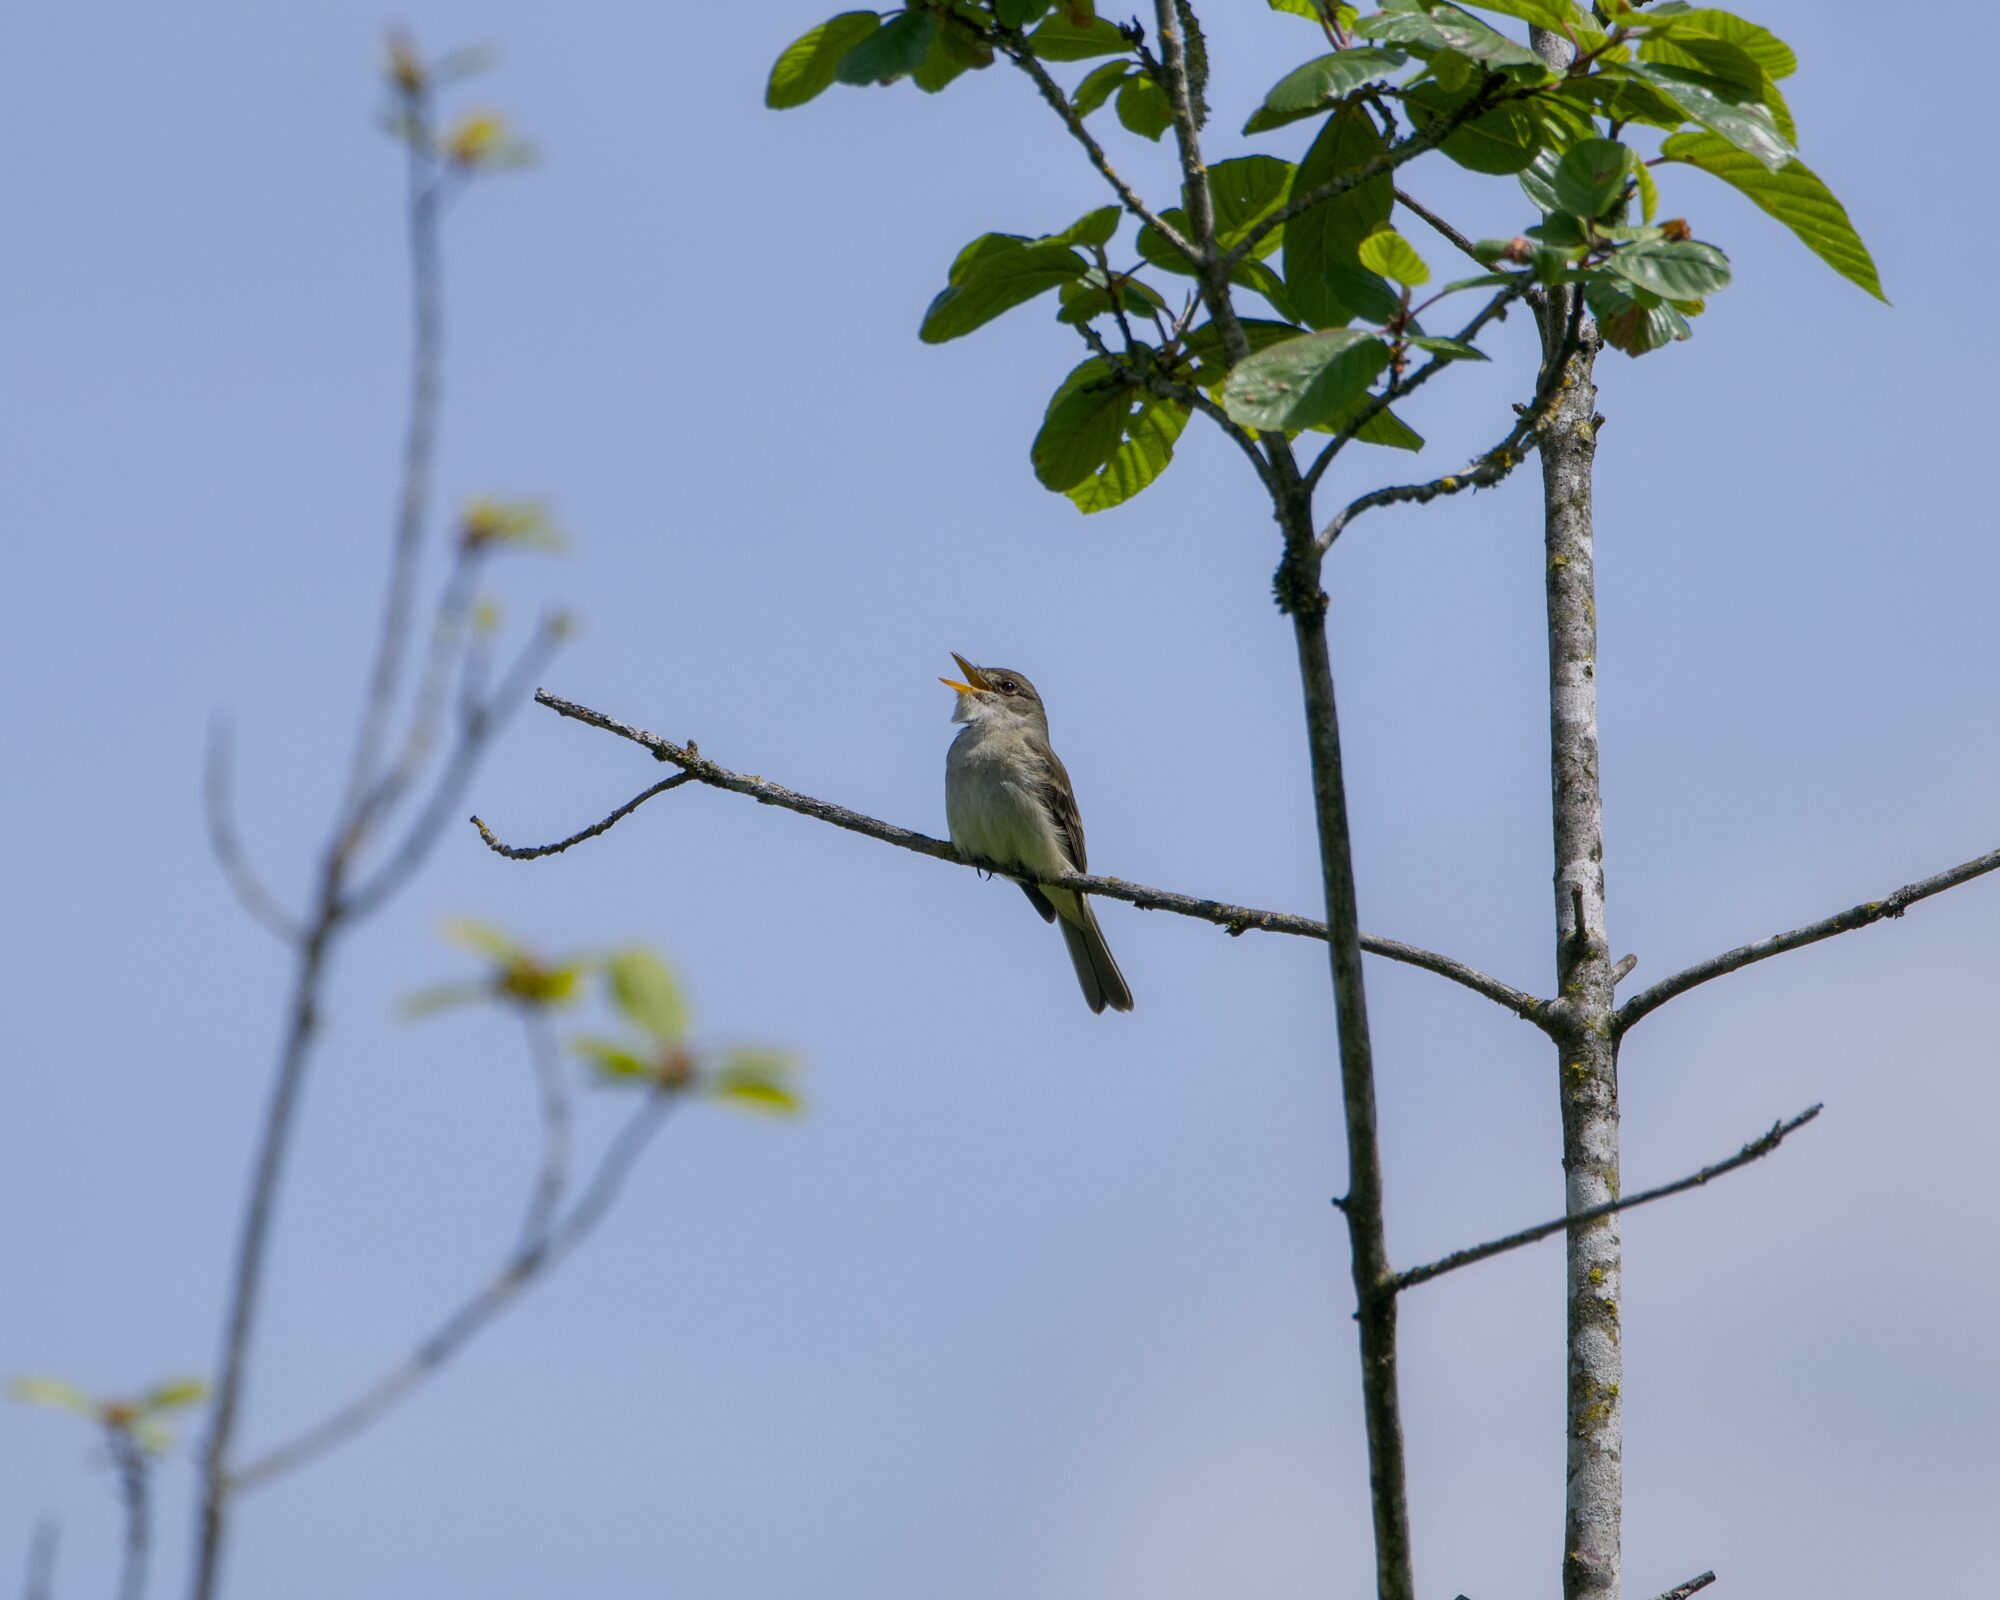 A Willow Flycatcher -- a rather nondescript little bird with grey / olive plumage and a long thin beak -- is up in a tree and singing